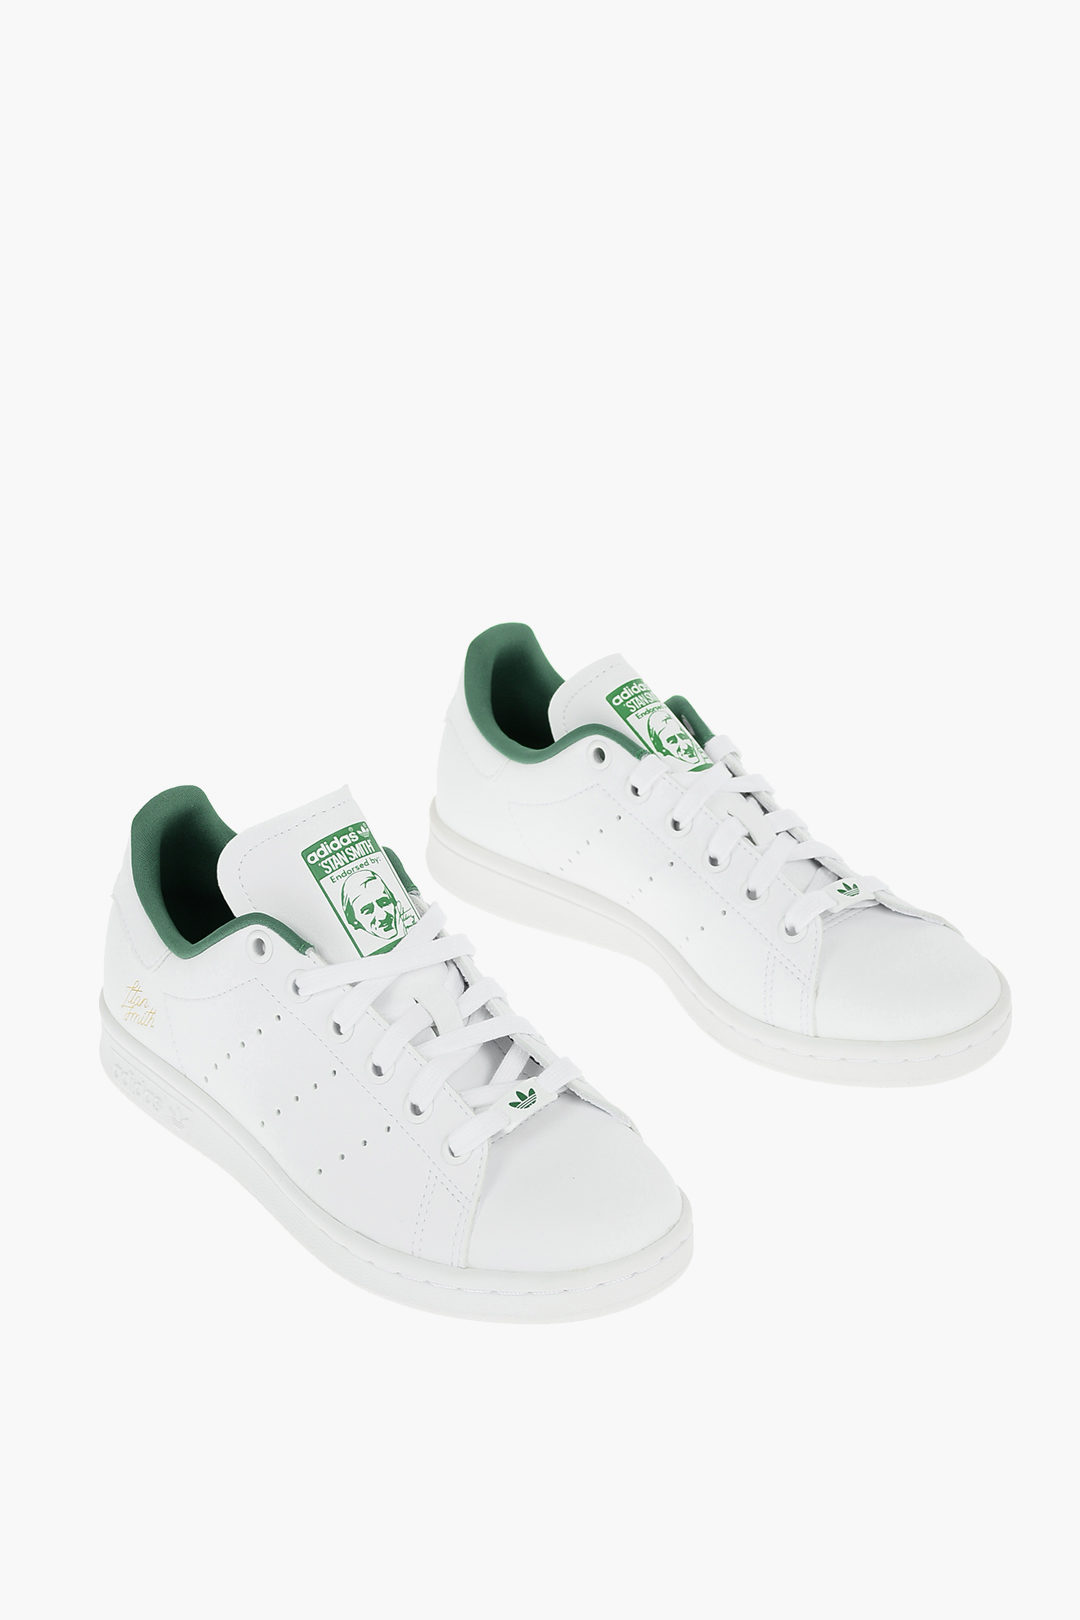 Adidas Textured Faux Leather STAN SMITH Sneakers With Perforated Details  unisex men women - Glamood Outlet